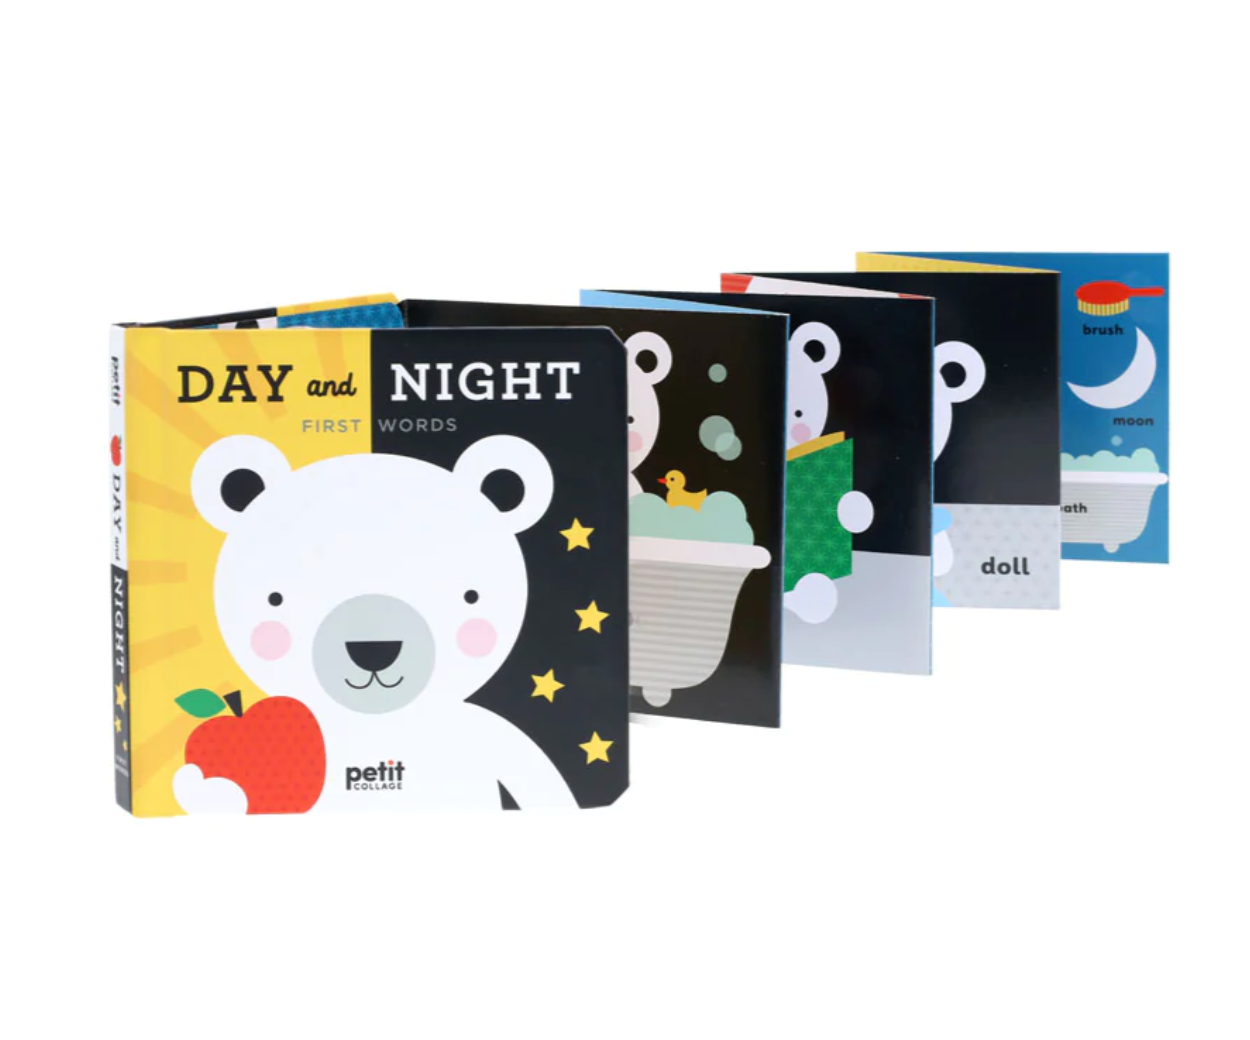 Day and Night: First Words Accordion Book